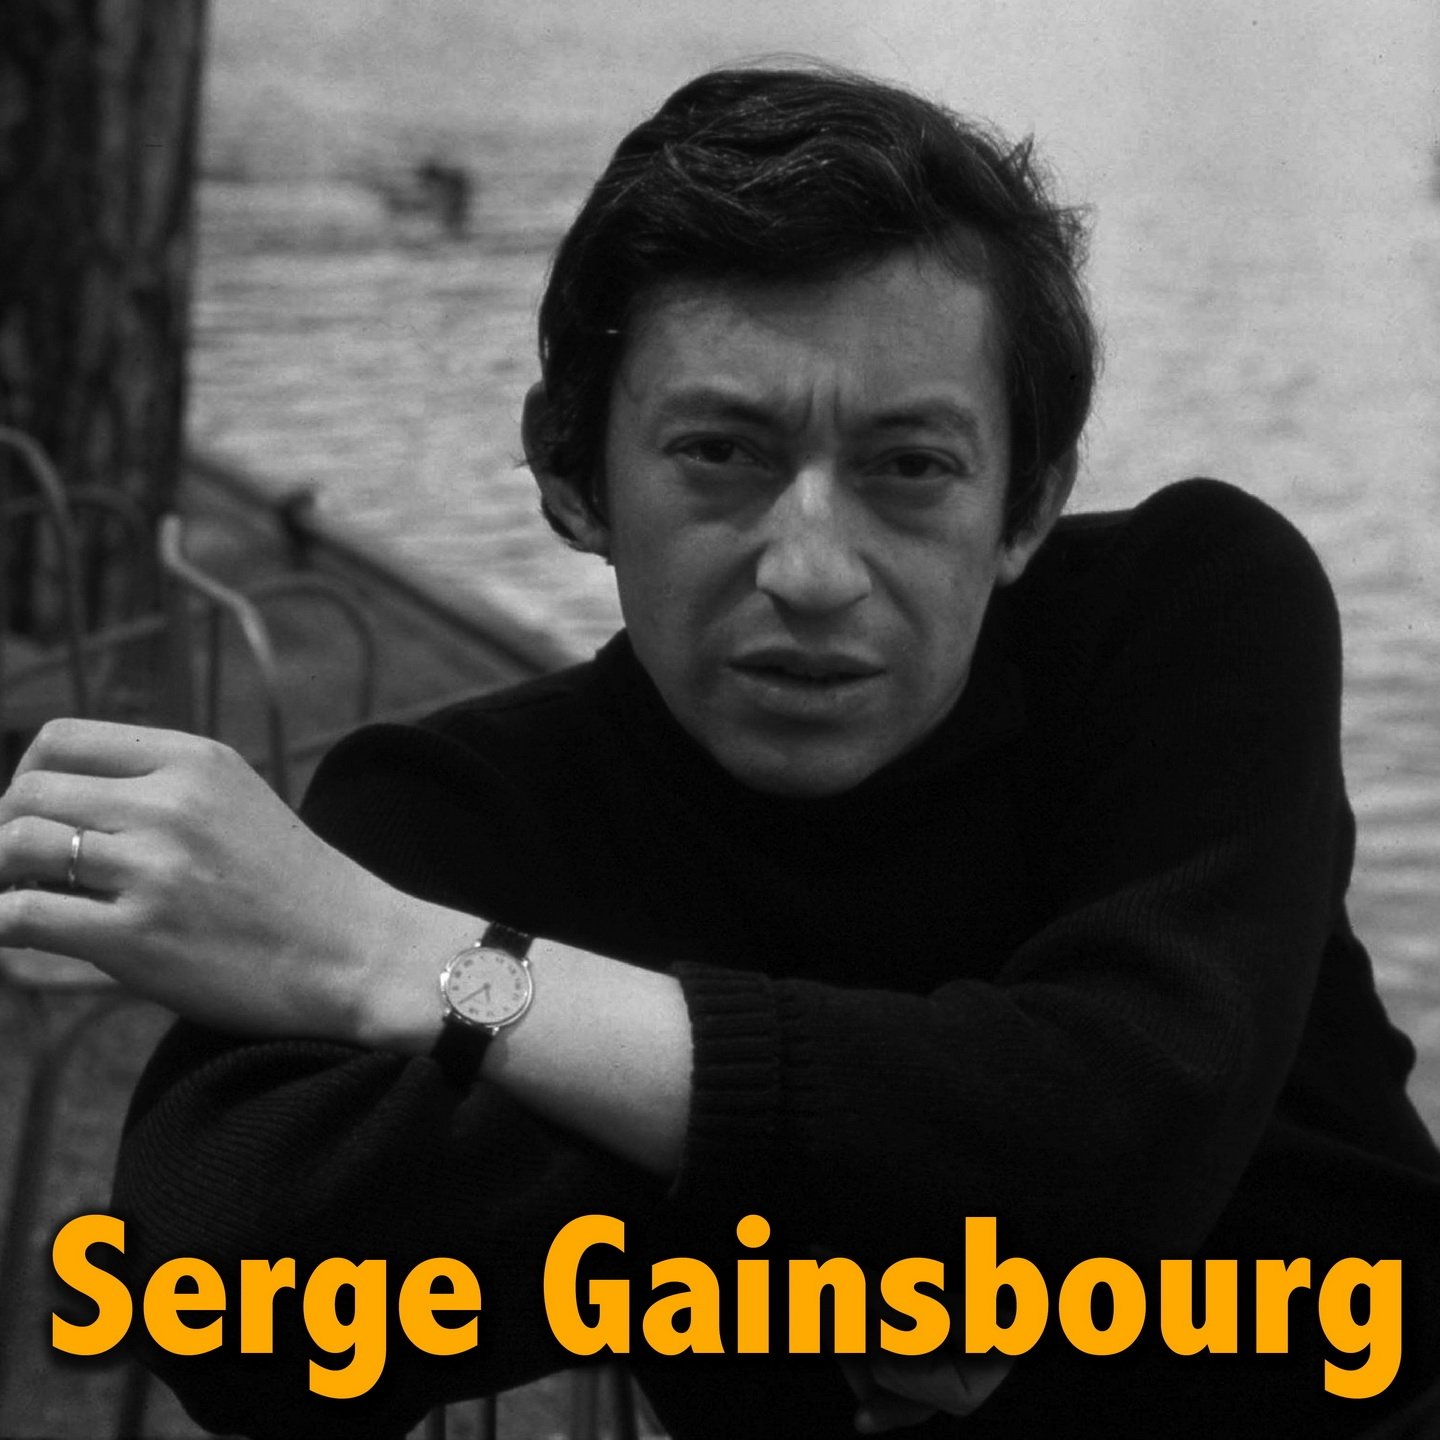 The Best of Serge Gainsbourg — Serge Gainsbourg | Last.fm